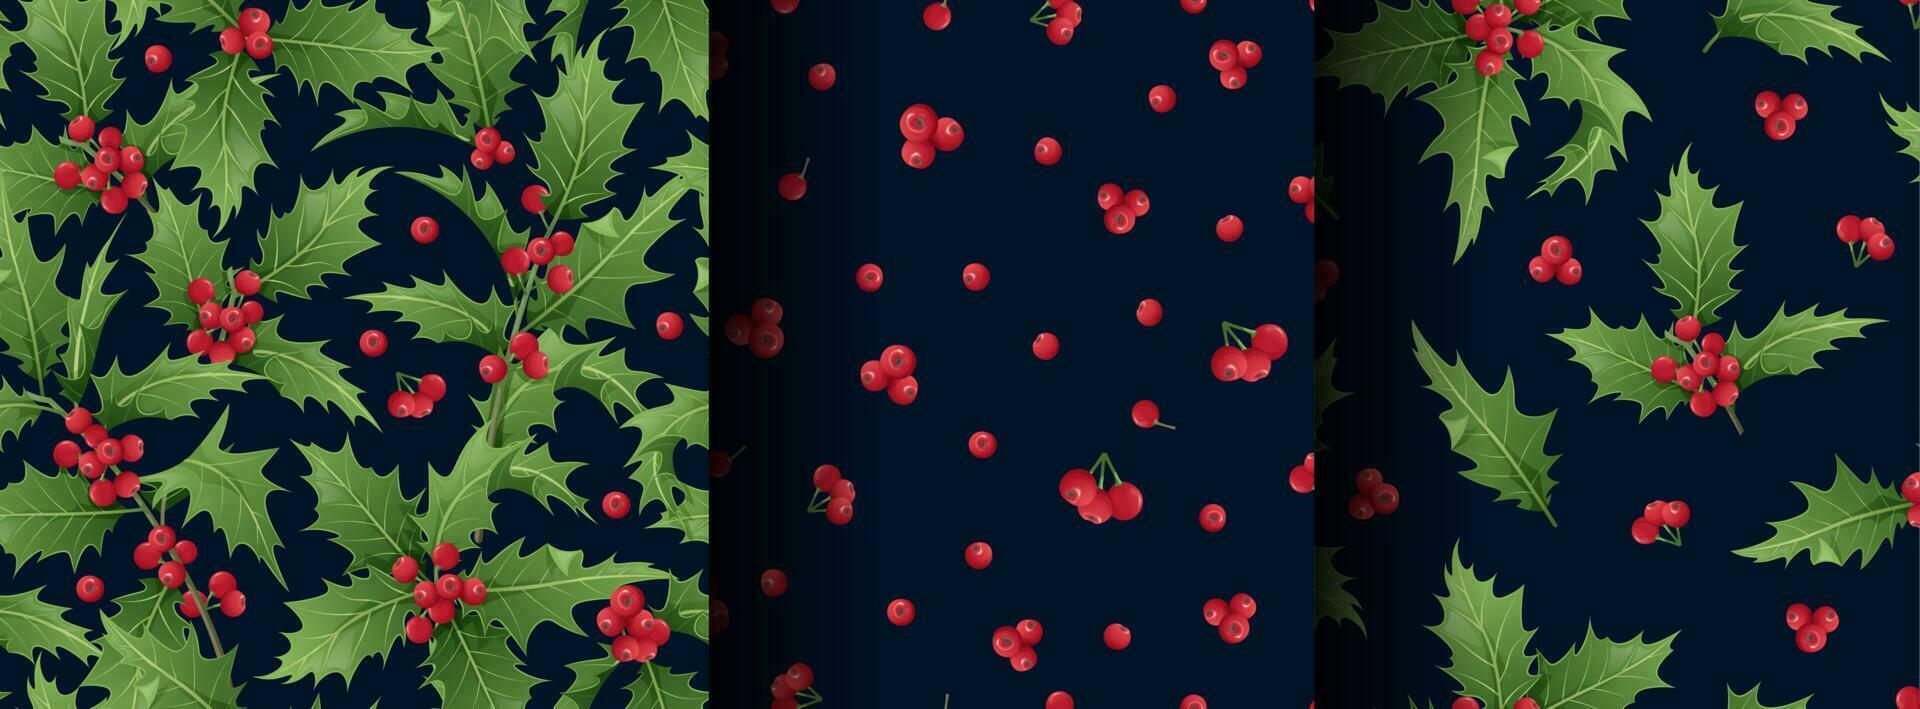 Set of Christmas seamless patterns with holly branches, leaves and berries on a dark background. Christmas mood. Suitable for wrapping paper, wallpaper, textile vector